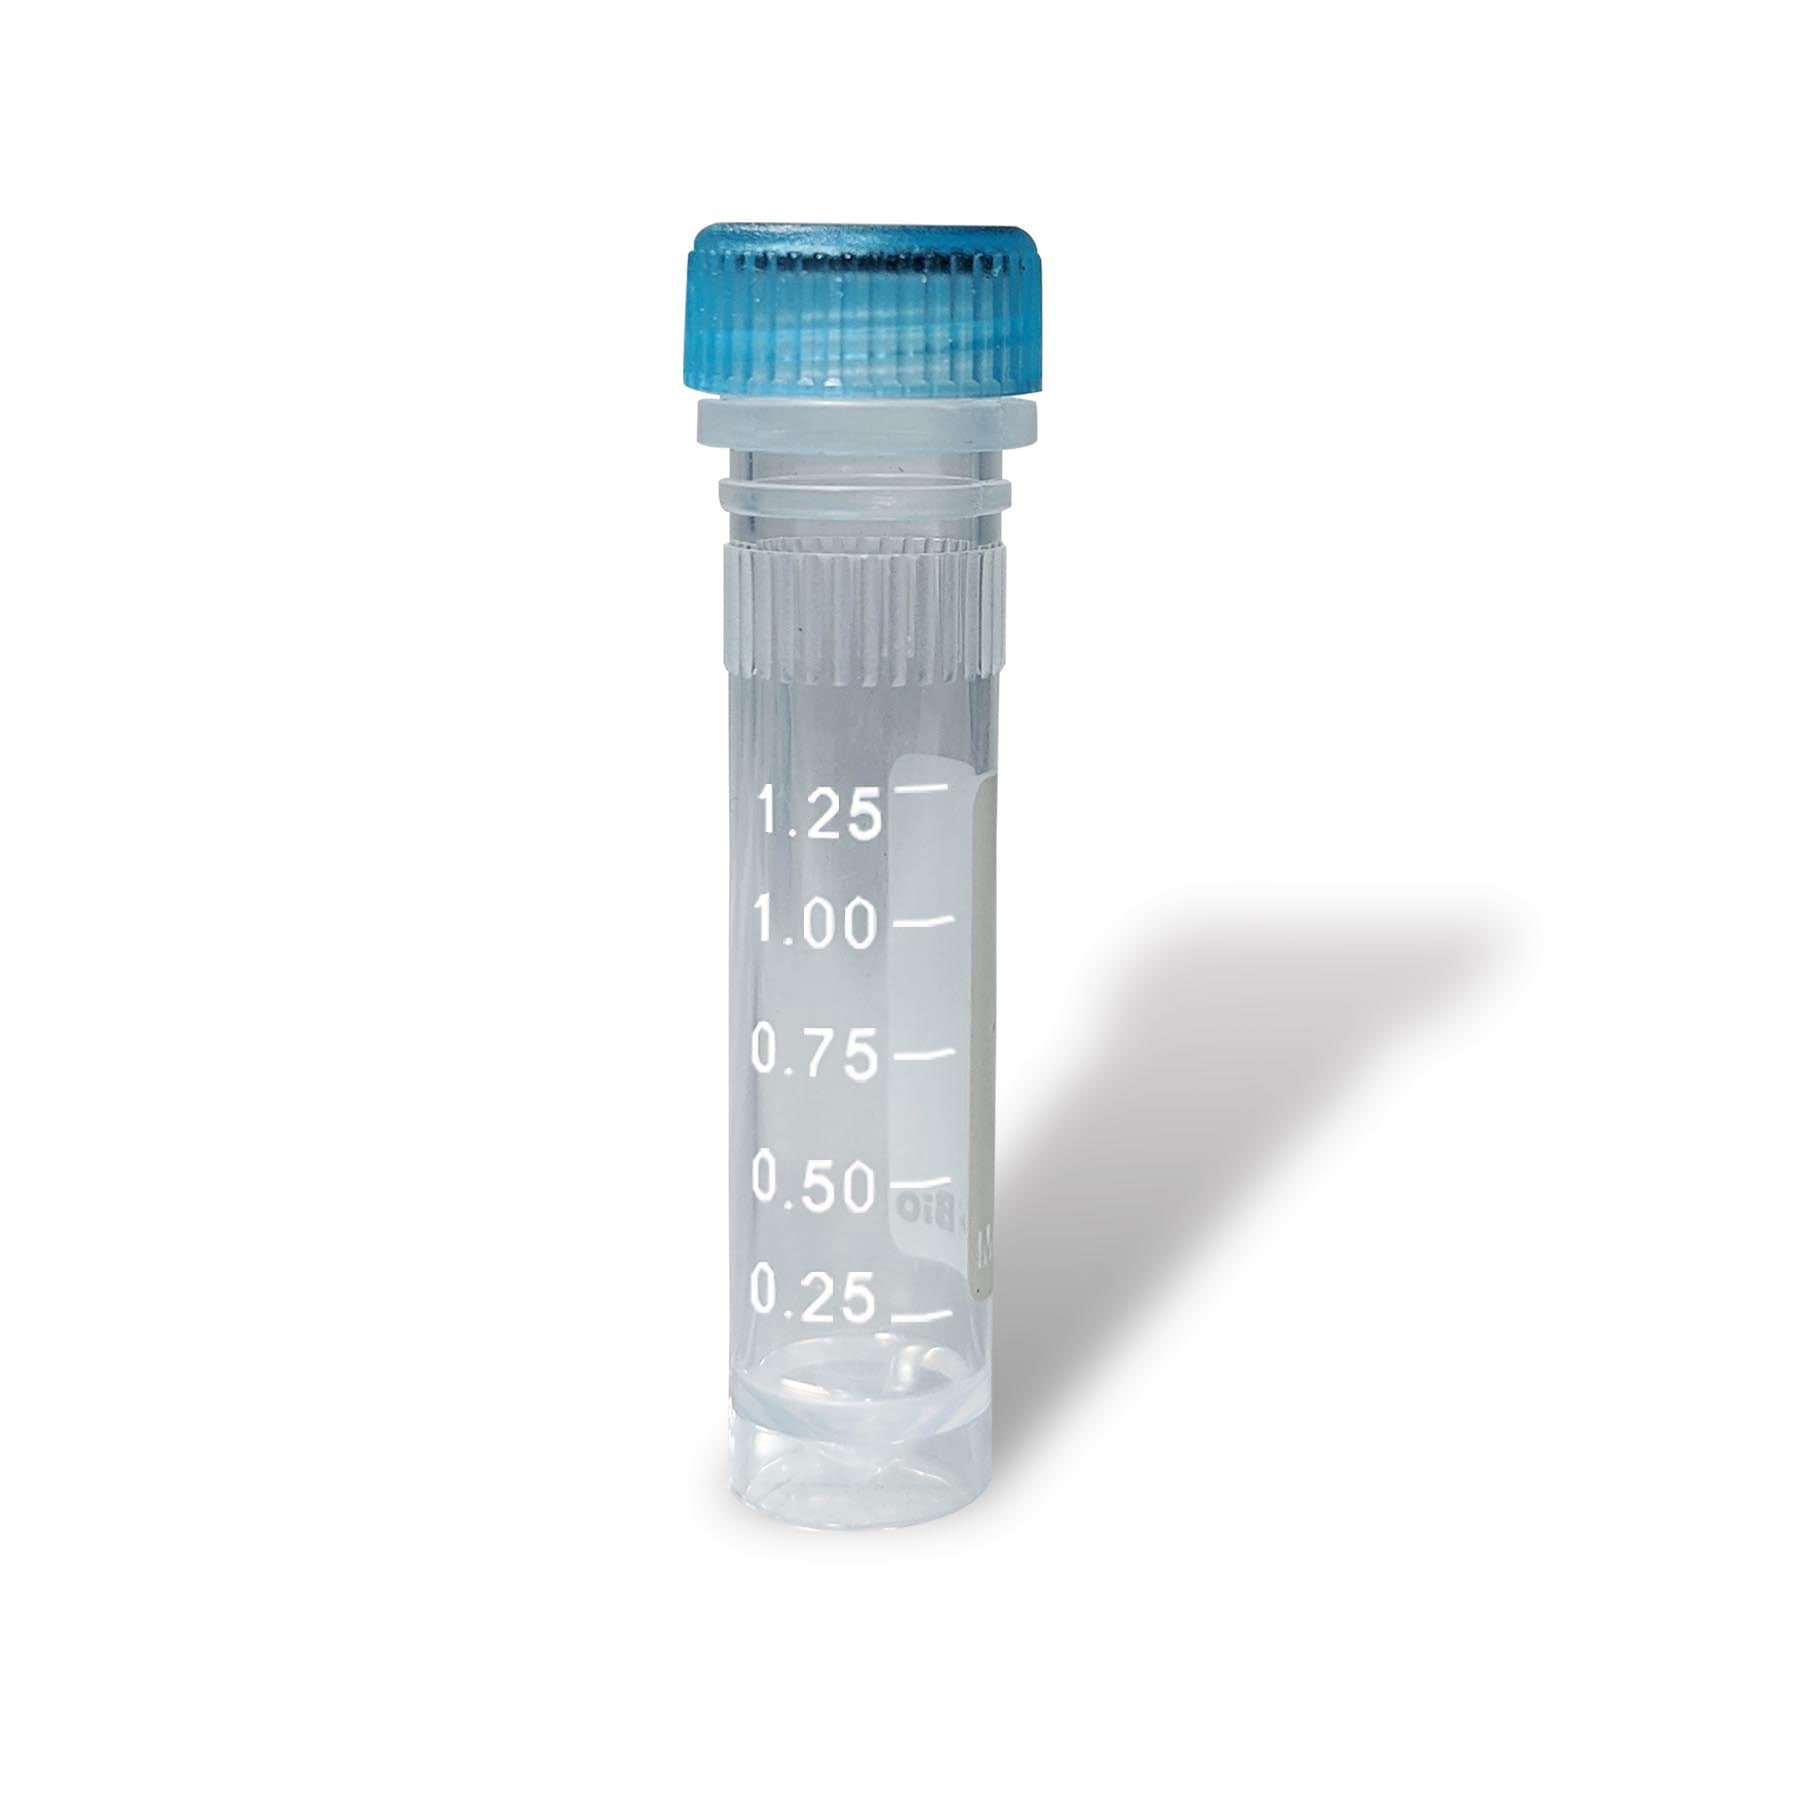 MTC Bio C3220-SG, Clearseal Microcentrifuge Tube, 2.0ml, Sterile, Printed Graduations, Self-Standing, 20 Resealable Bags of 50 Tubes, 1000/cs